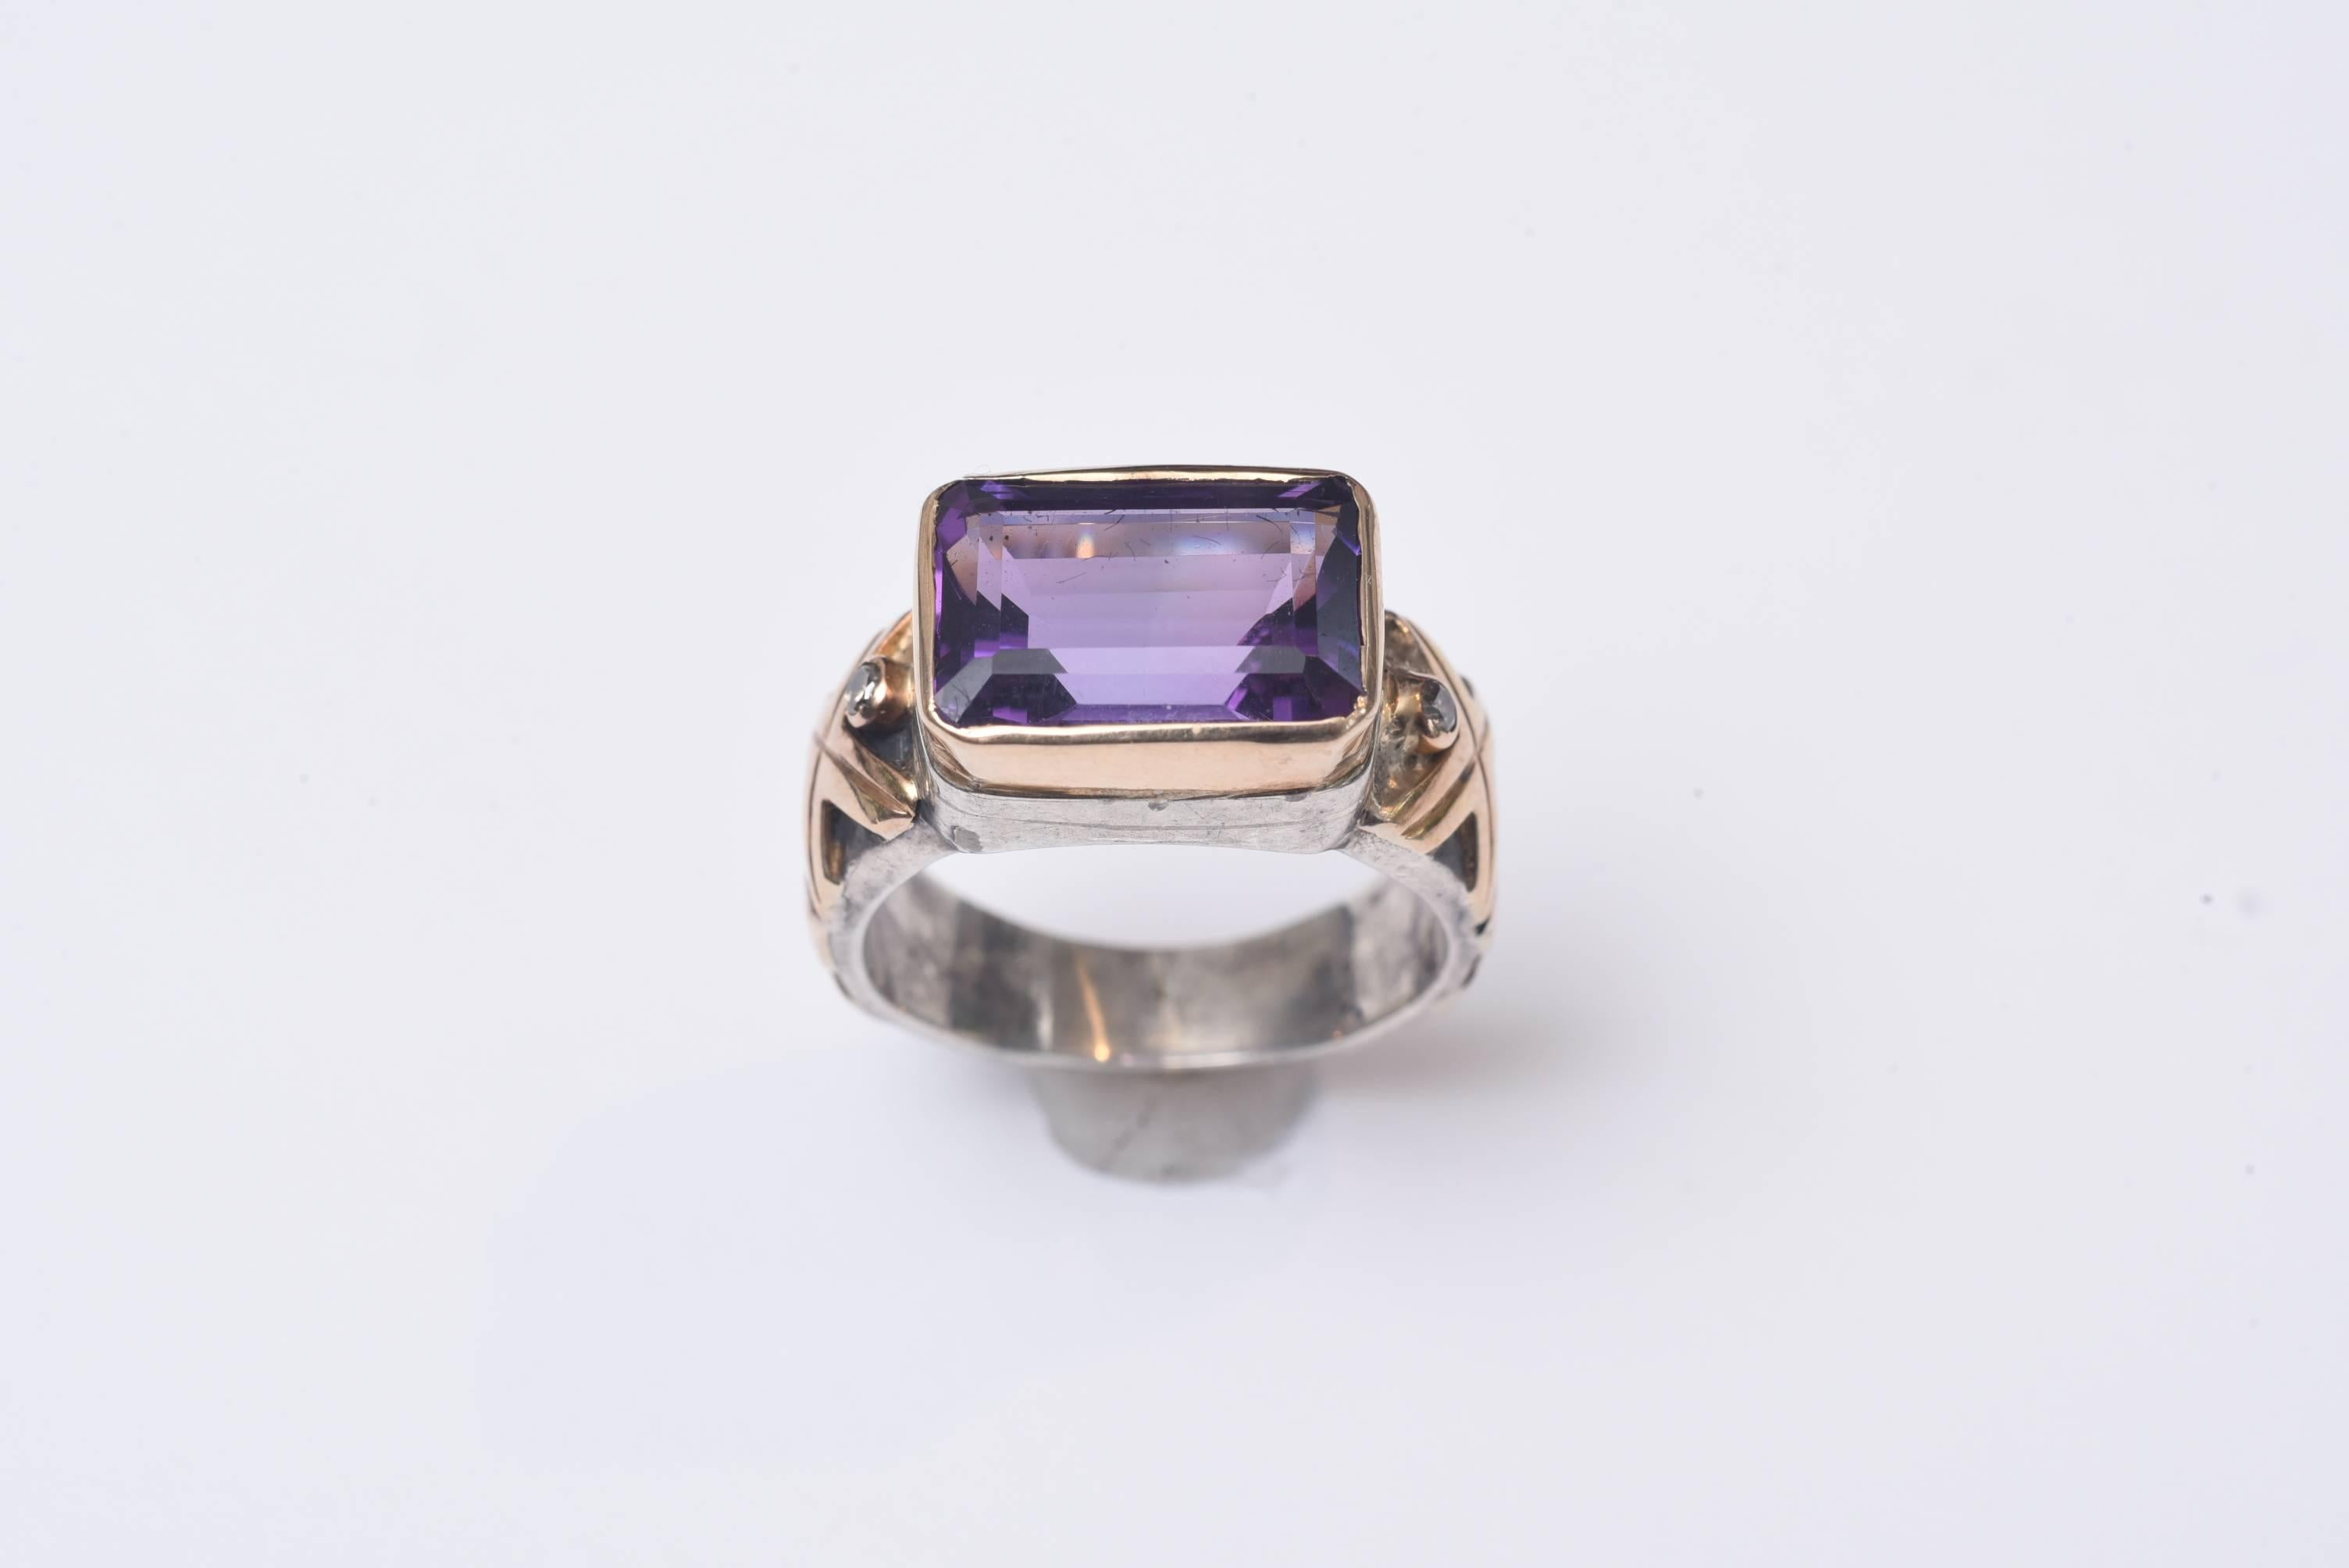 Emerald cut large amethyst set in 18K gold and sterling silver. flanked with two small faceted diamonds on each side. This is a weighted gold, not a gold plate. Gold work carries along the sides of the sterling band as well. Ring size is 8.25 Carat